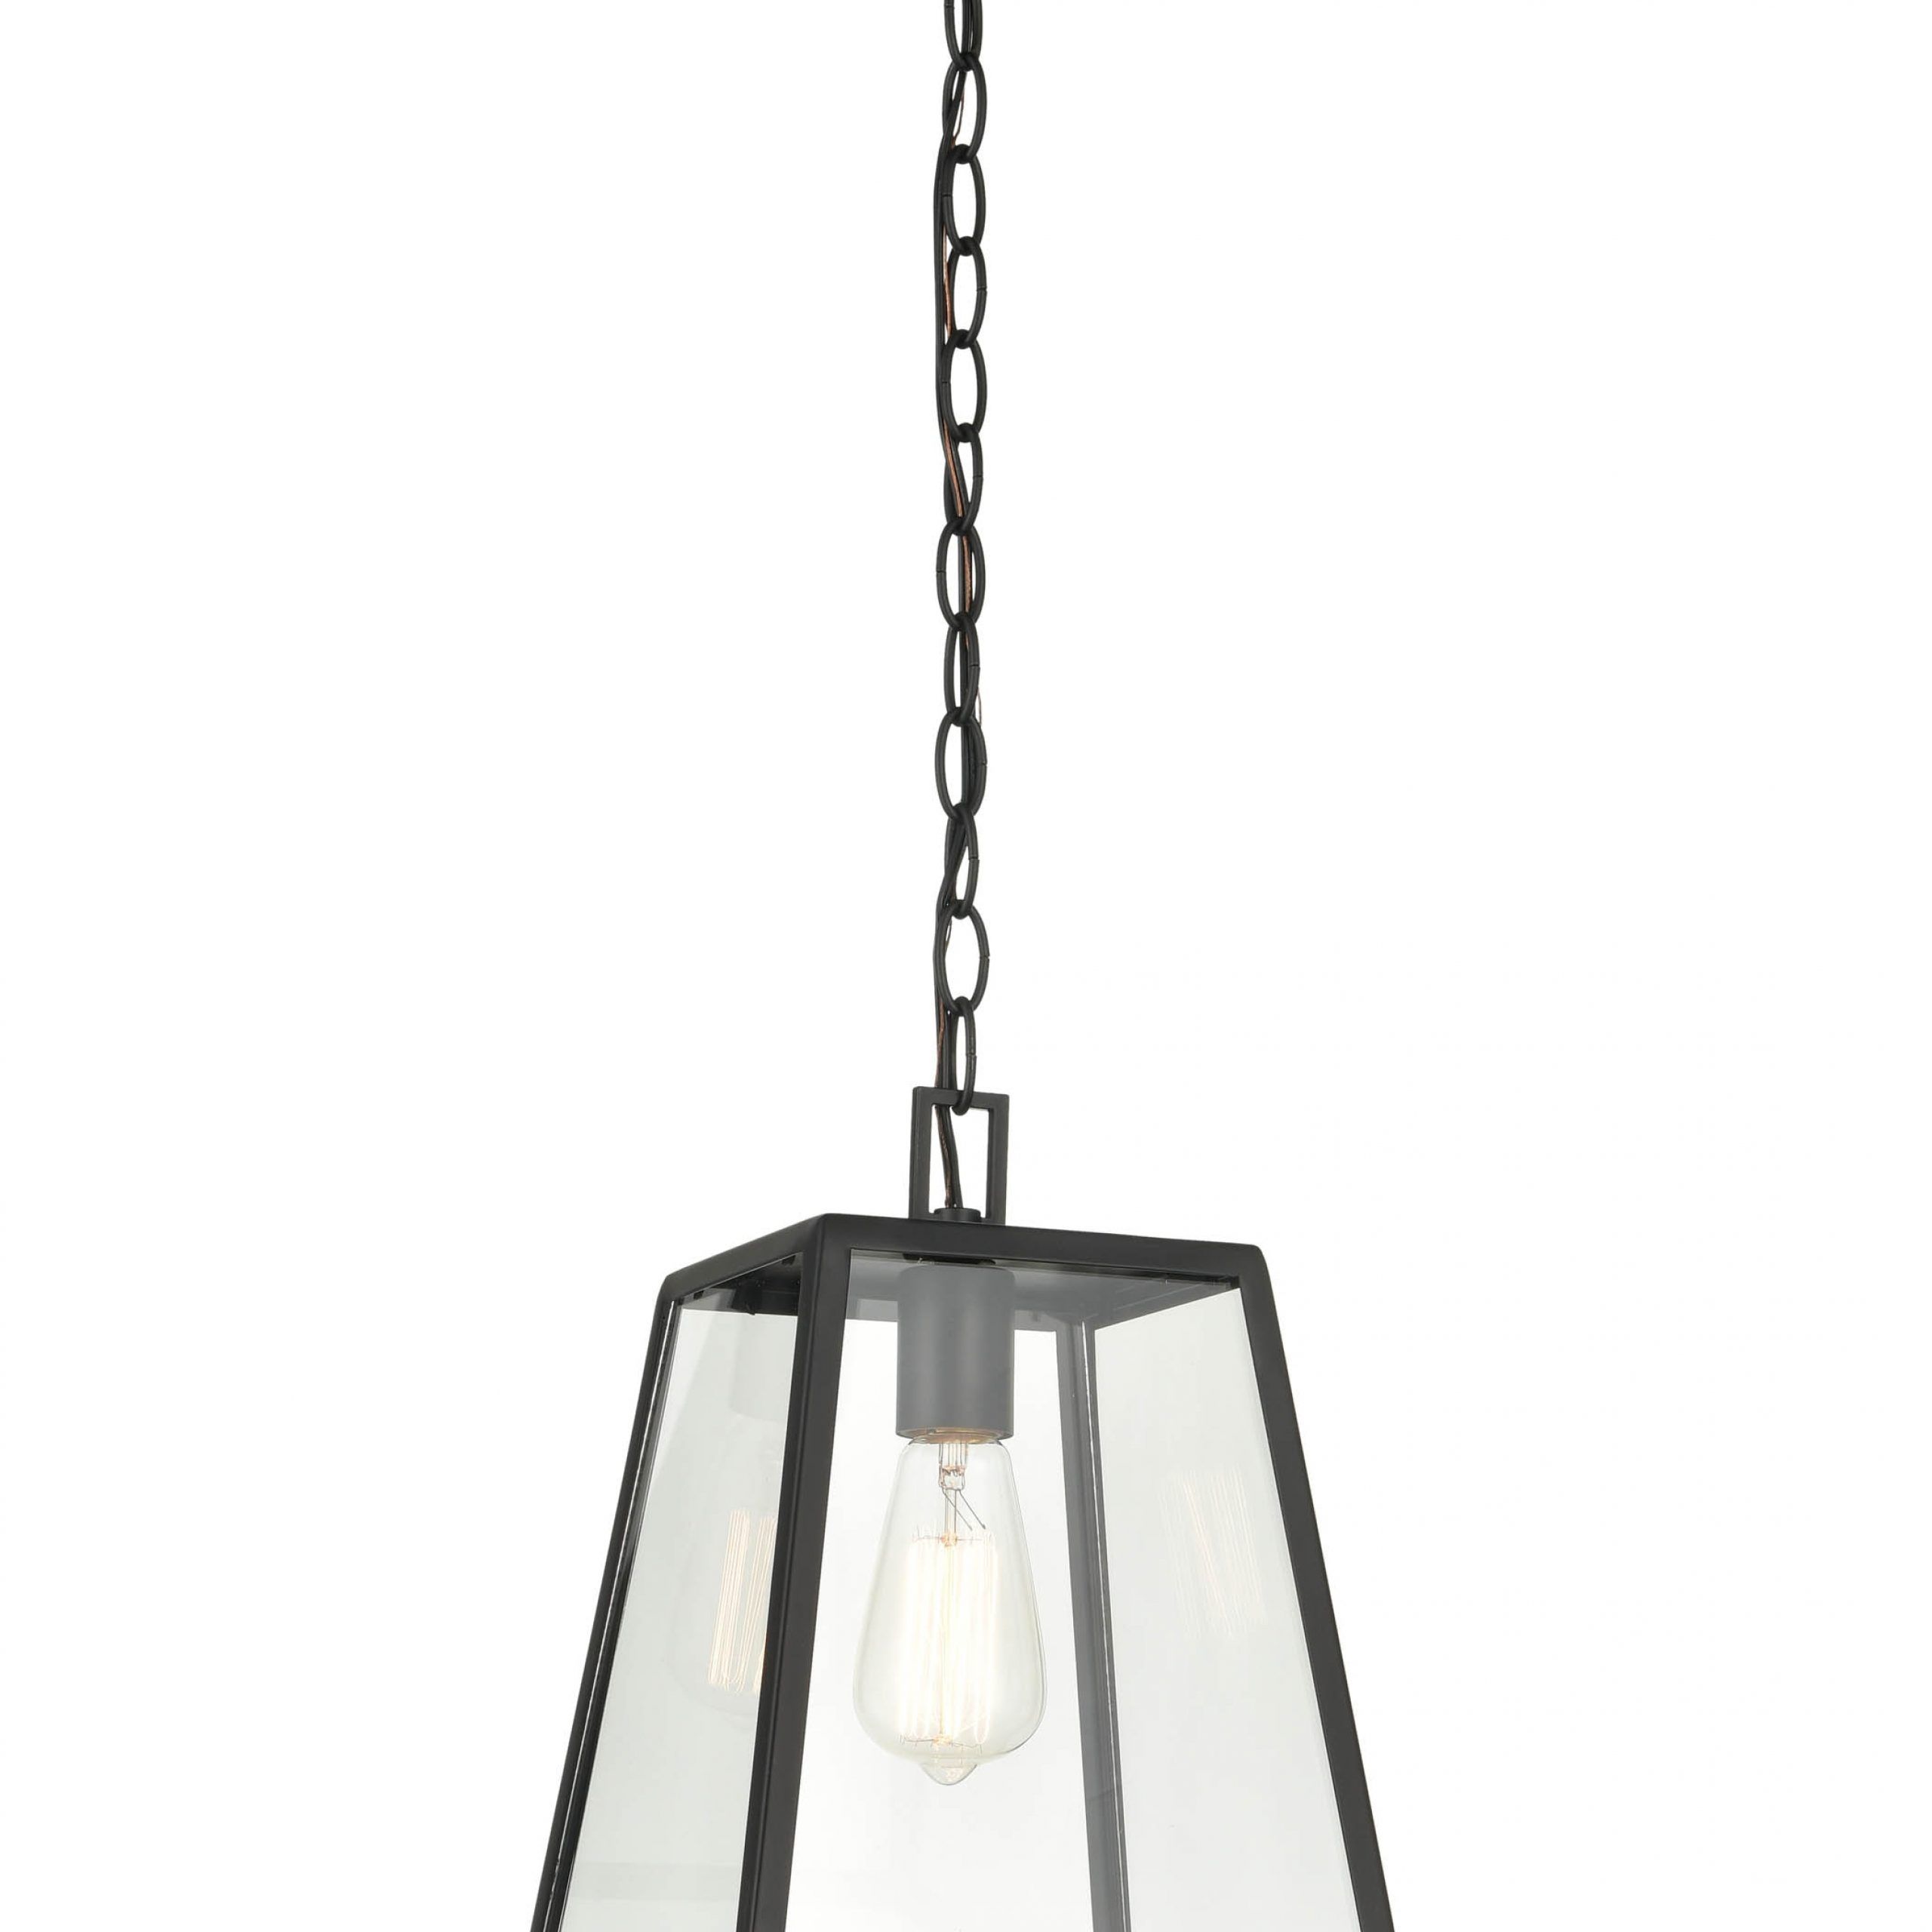 Newest Millennium Lighting Grant Powder Coat Black Transitional Clear Glass Lantern  Outdoor Pendant Light In The Pendant Lighting Department At Lowes For Black Powder Coat Lantern Chandeliers (View 14 of 15)